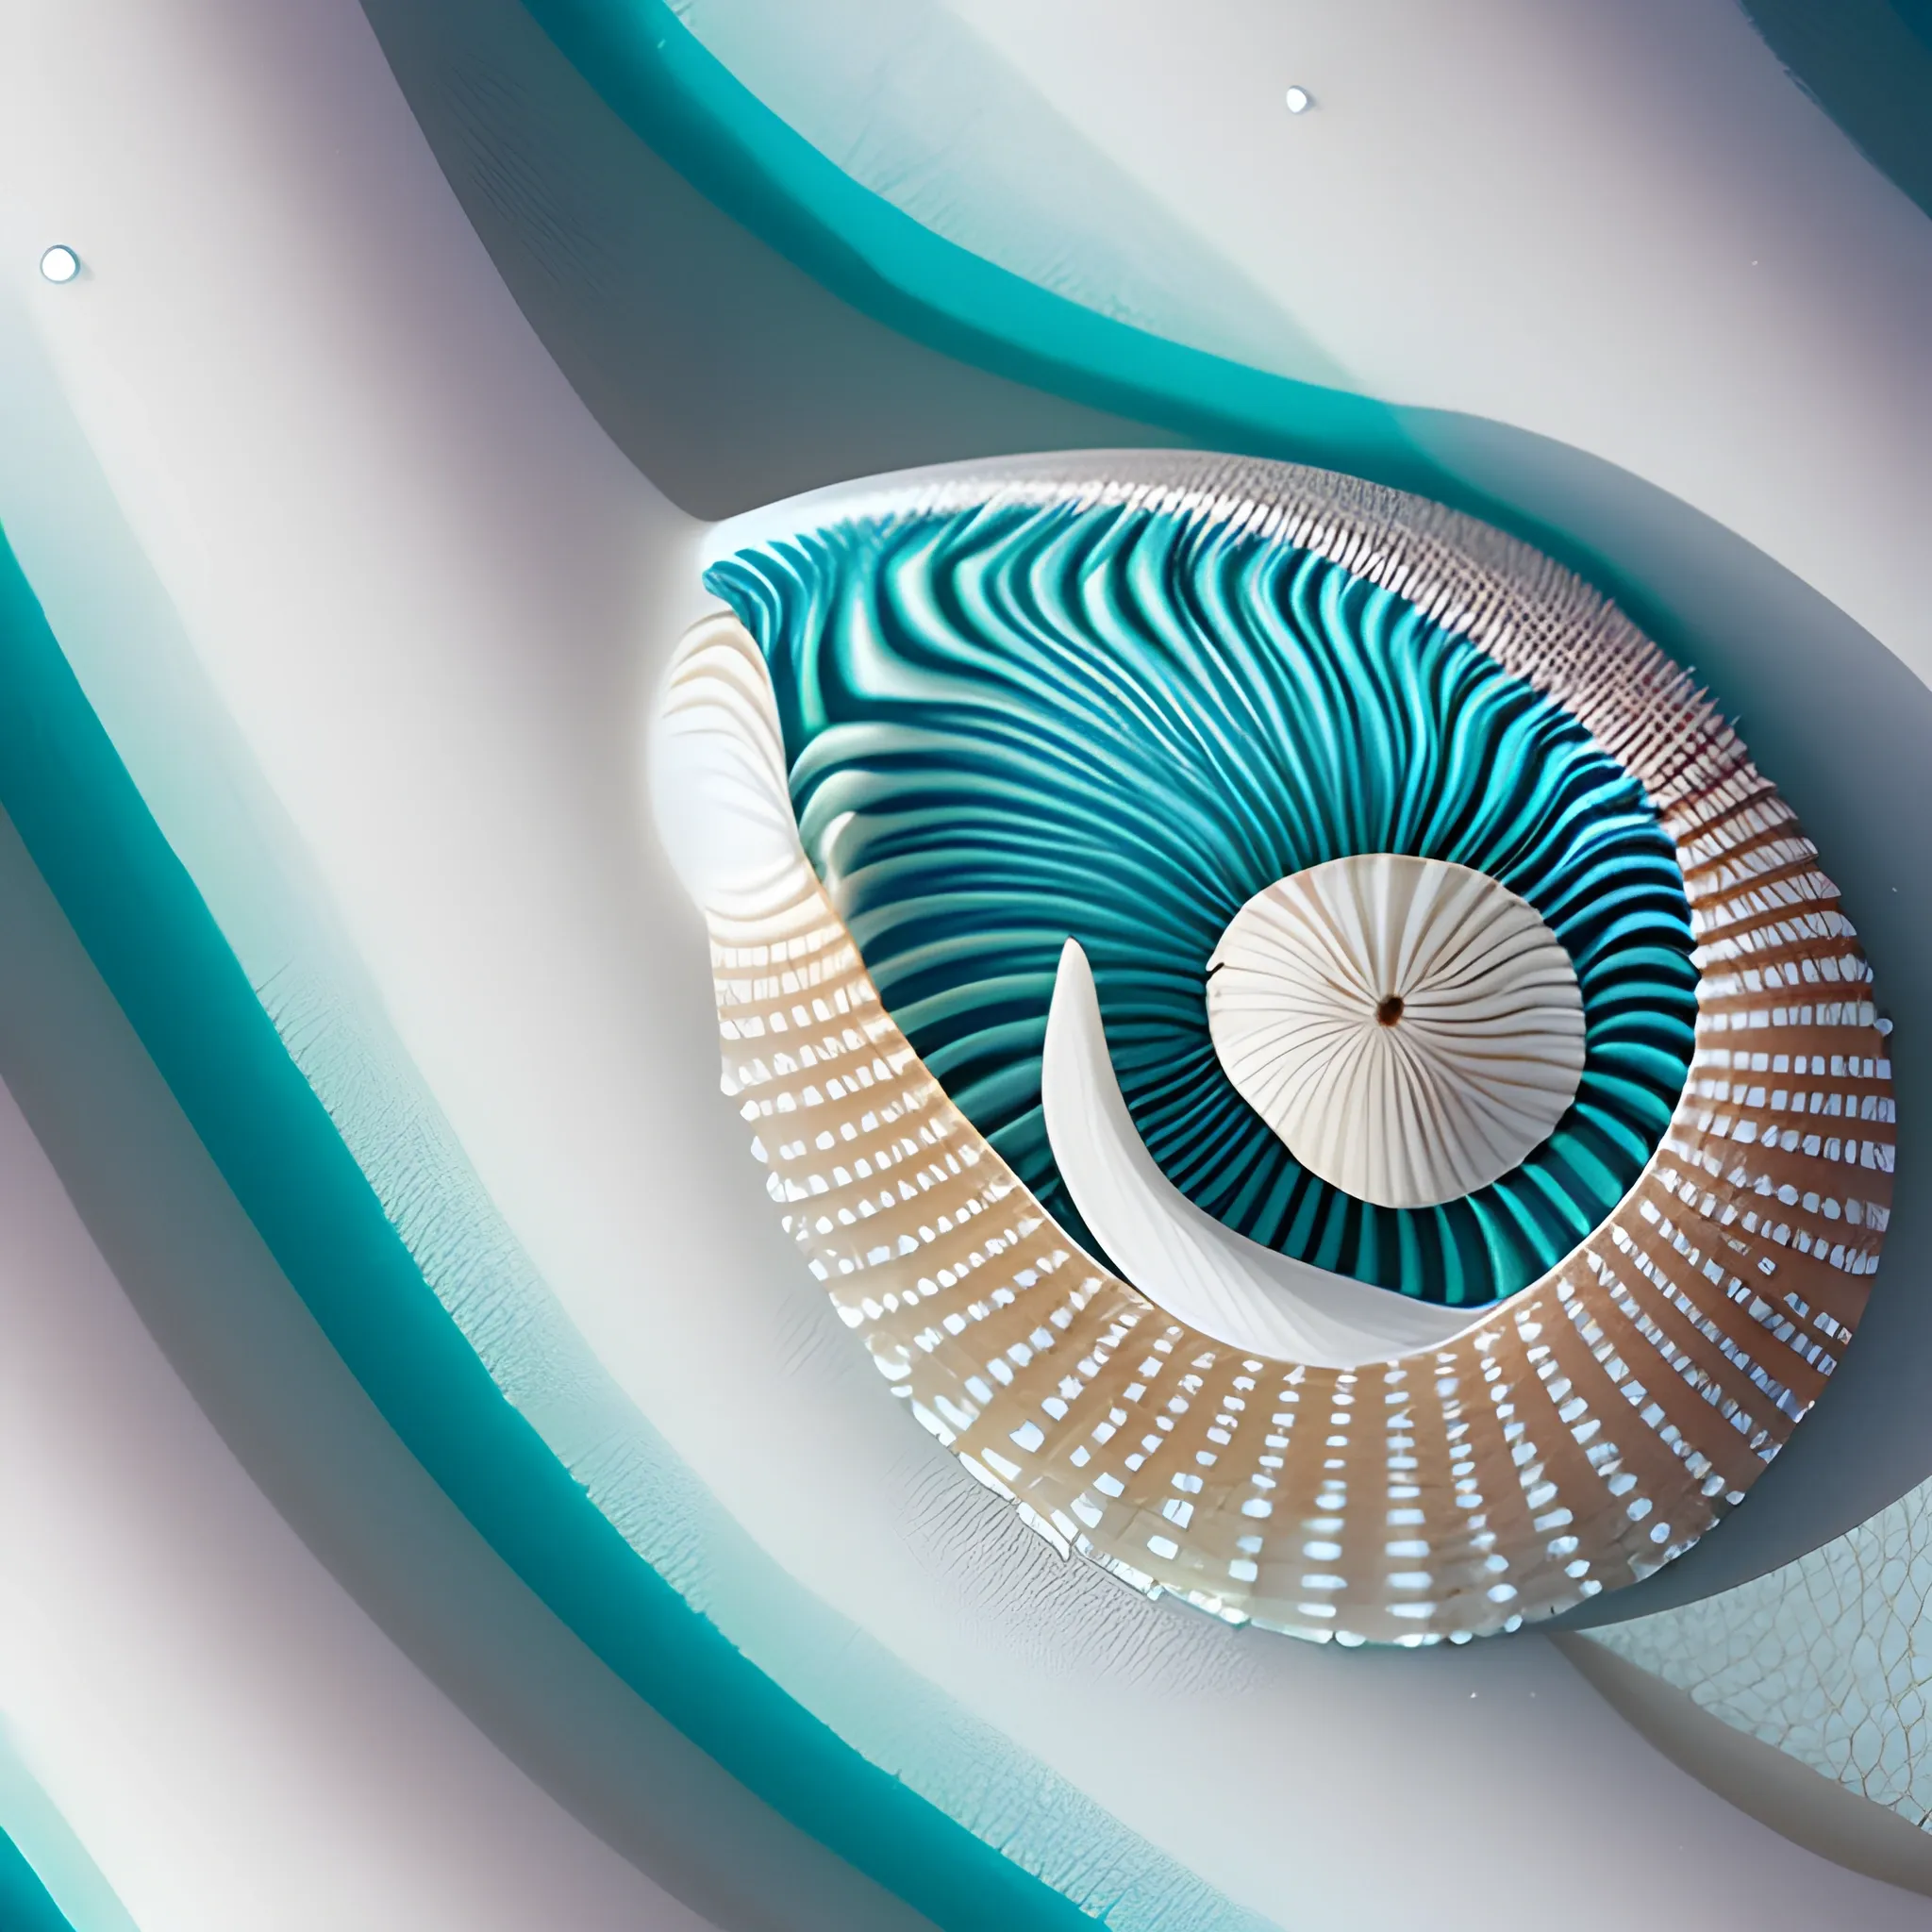 Line Art, close-up macro shots of unusual sea creatures among dazzling white sands and vivid shells on the seafloor using available light, in the style of art nouveau.